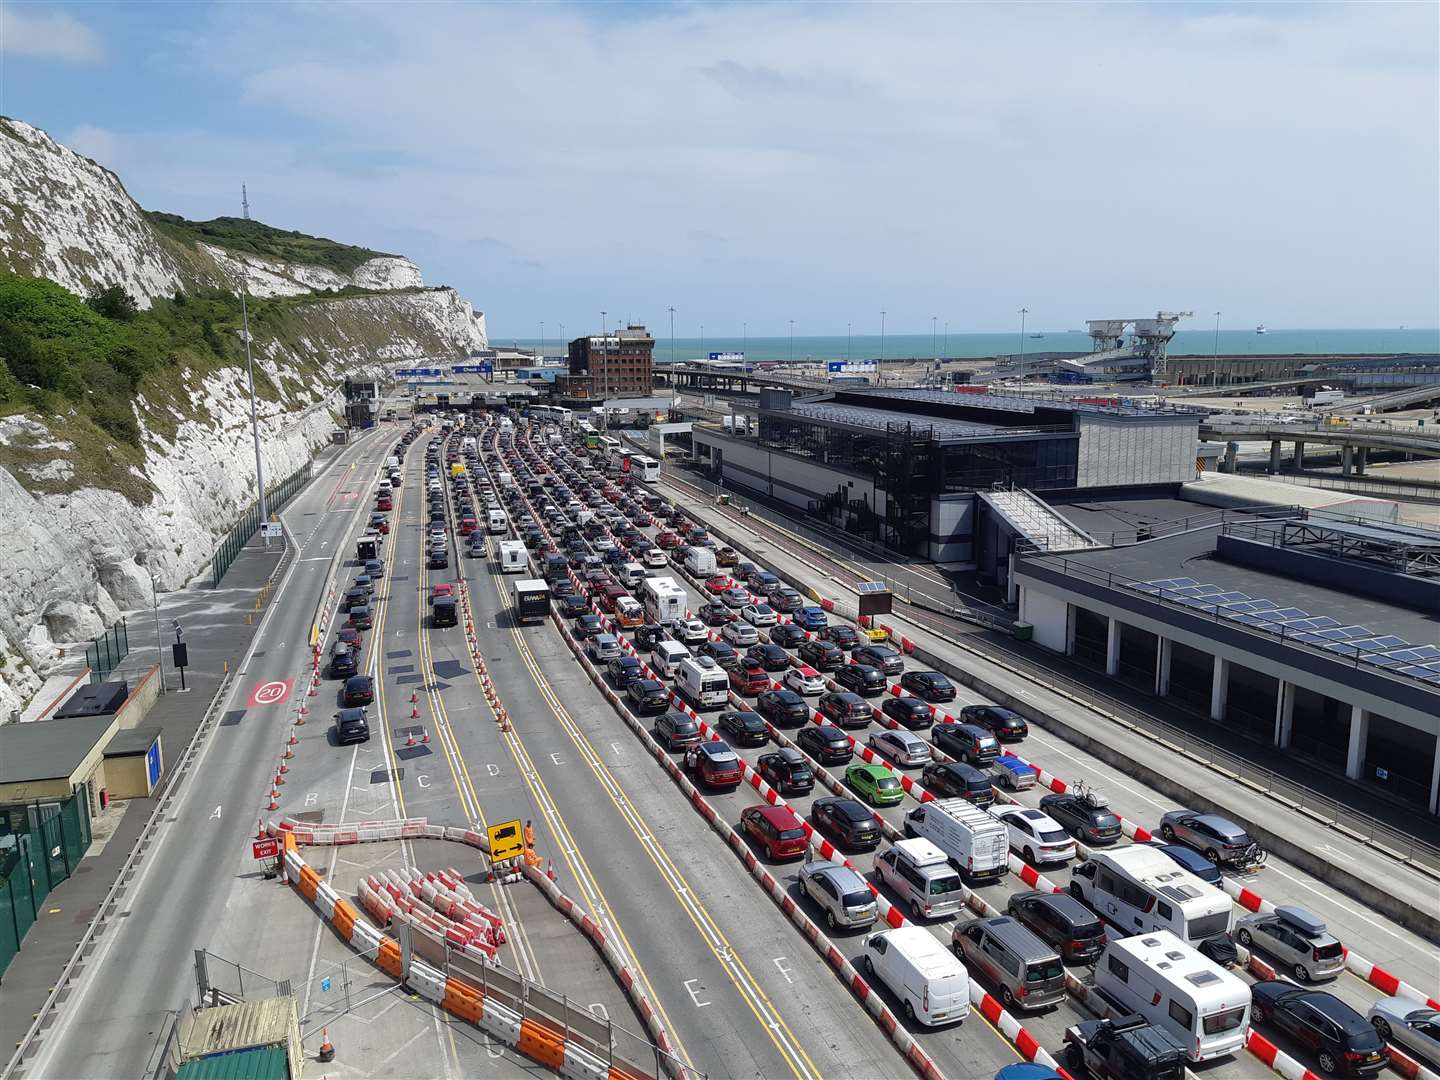 Cars have been left waiting for hours on roads in Dover as they attempt to leave for France. Picture: Sam Lennon